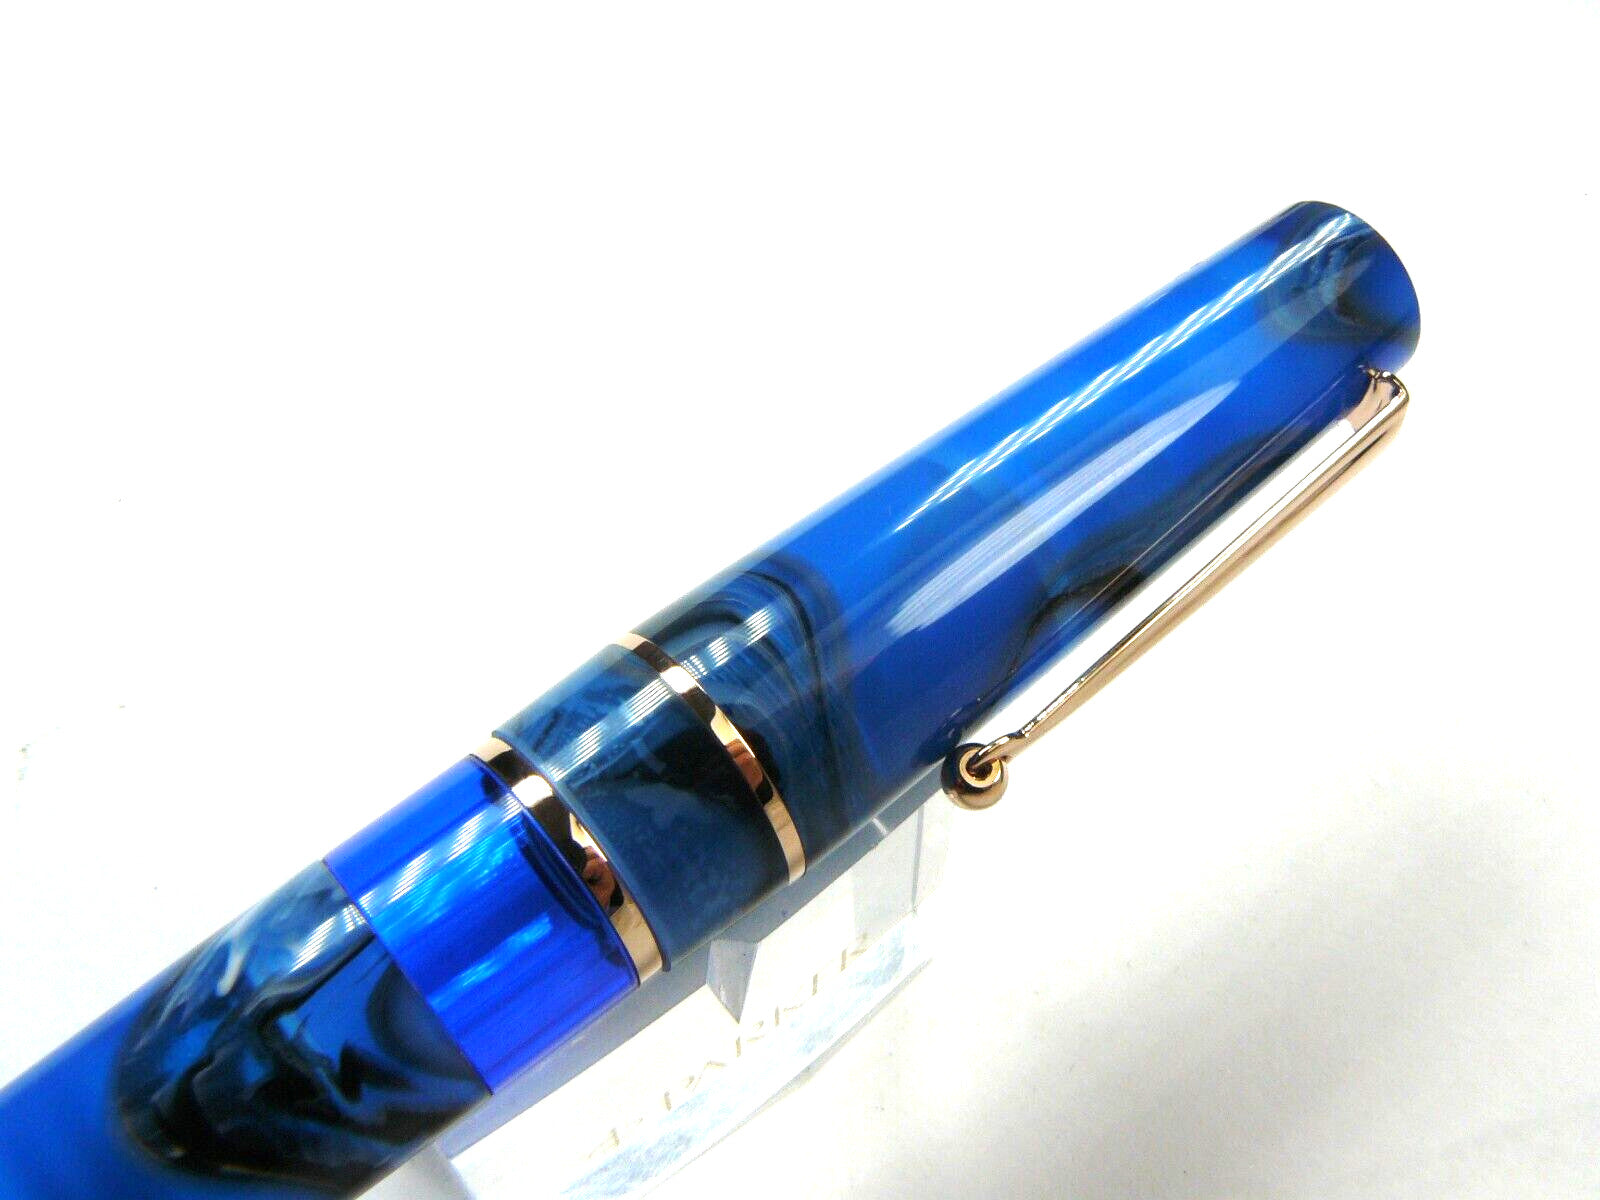 Dip Pen Nibs (Blue and Yellow) Pin for Sale by illucalliart